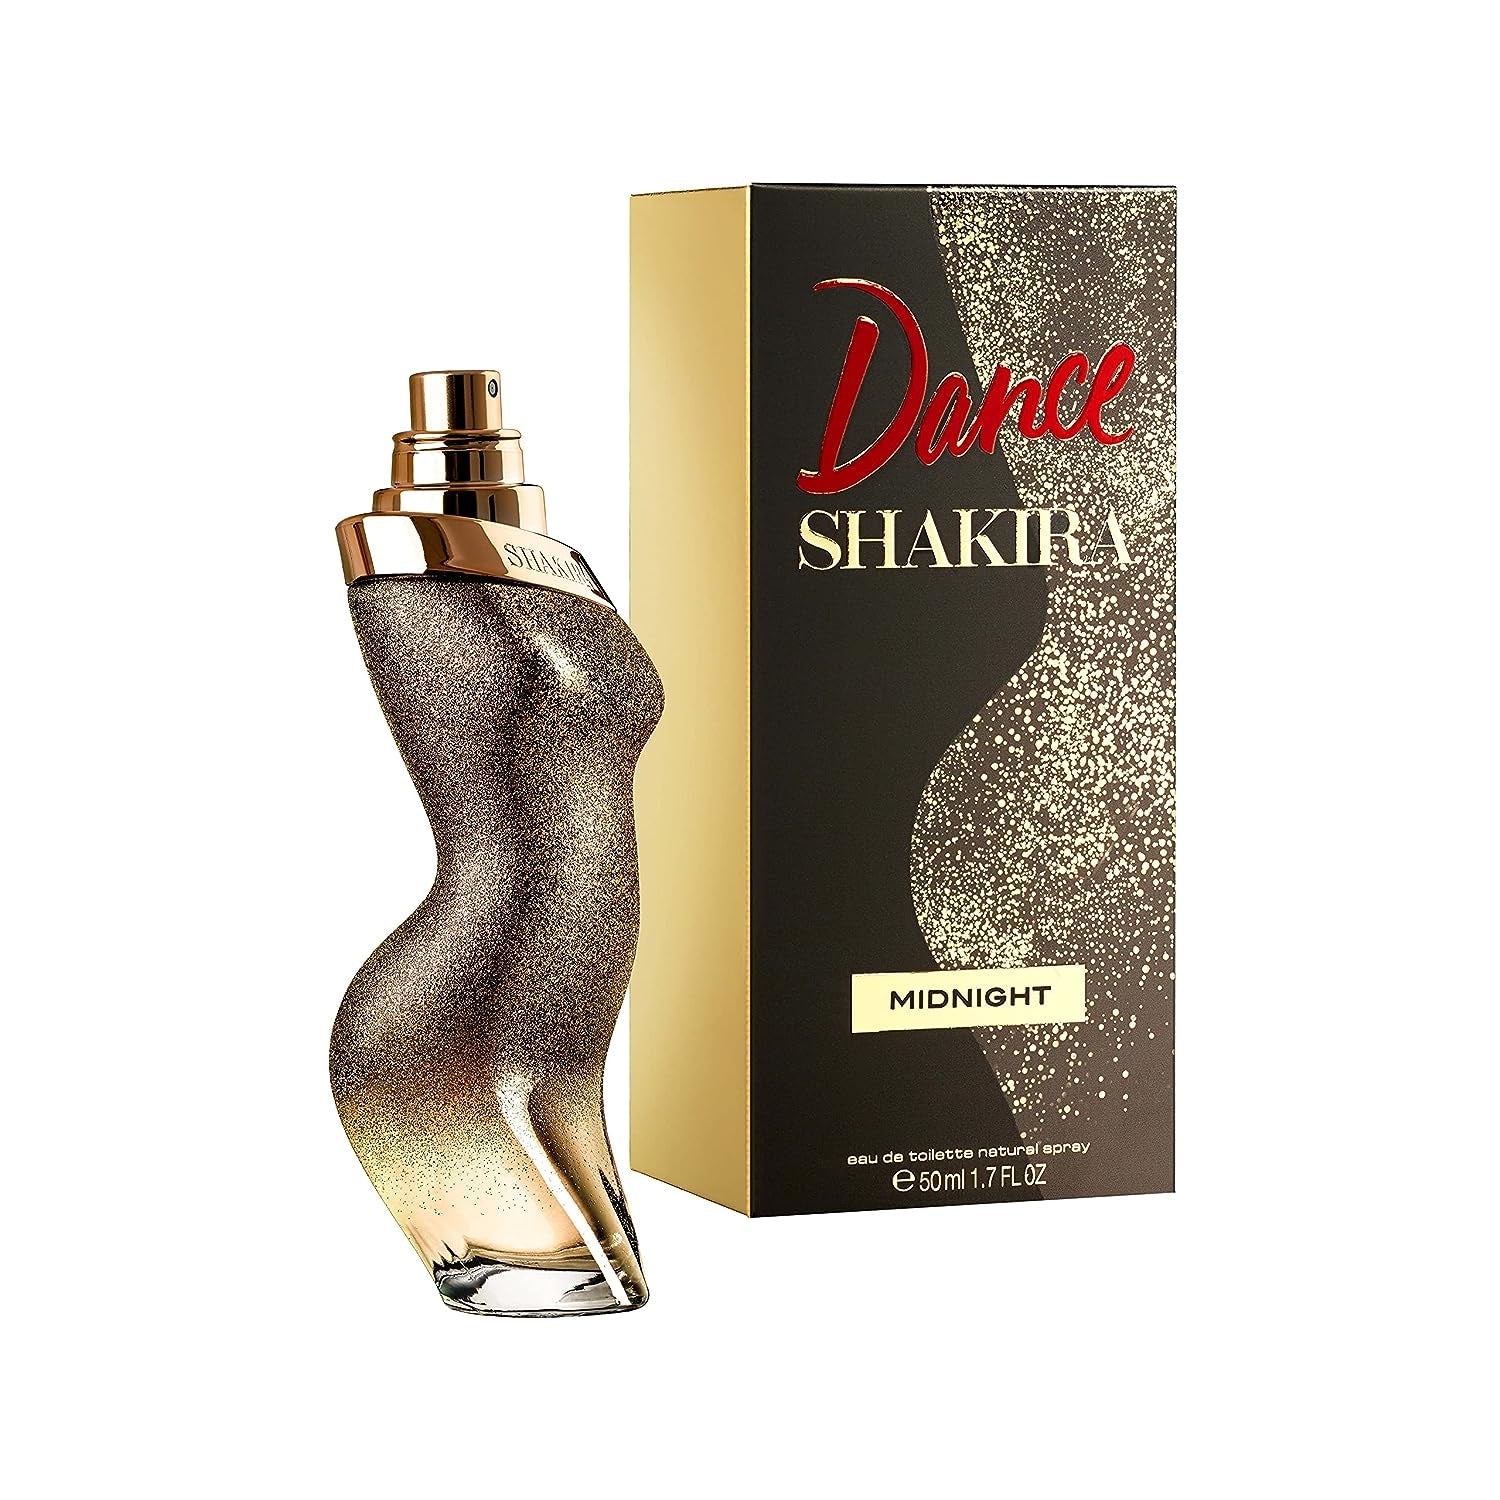 Shakira Perfume - Dance Midnight for Women - Long Lasting - Femenine, Charming and Romantic Fragance - Floral Gourmand Notes- Ideal for Day Wear - 1.7 Fl Oz